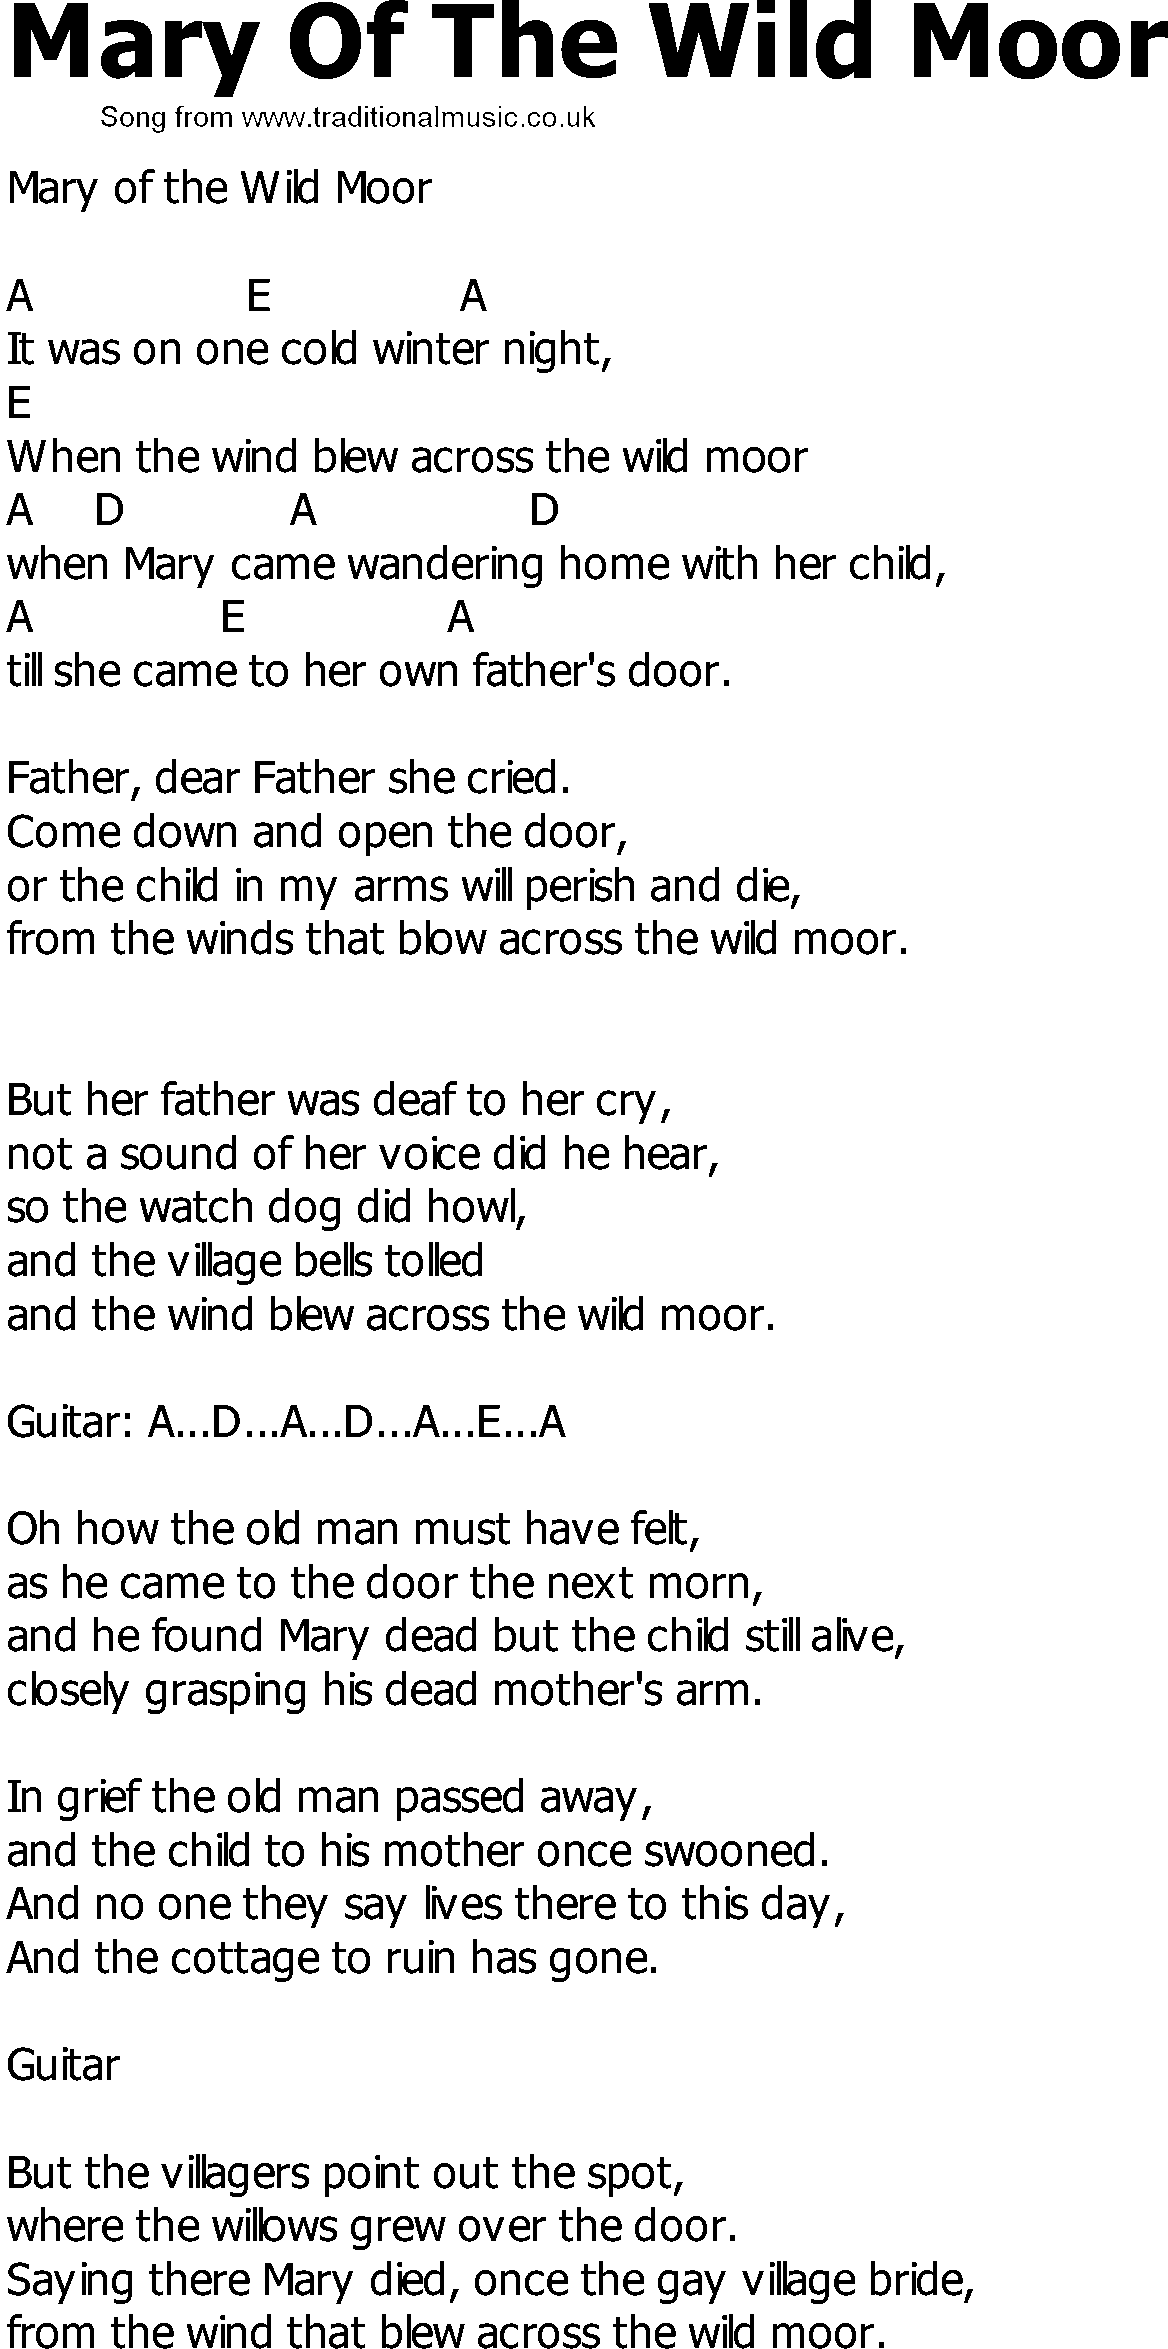 Old Country song lyrics with chords - Mary Of The Wild Moor